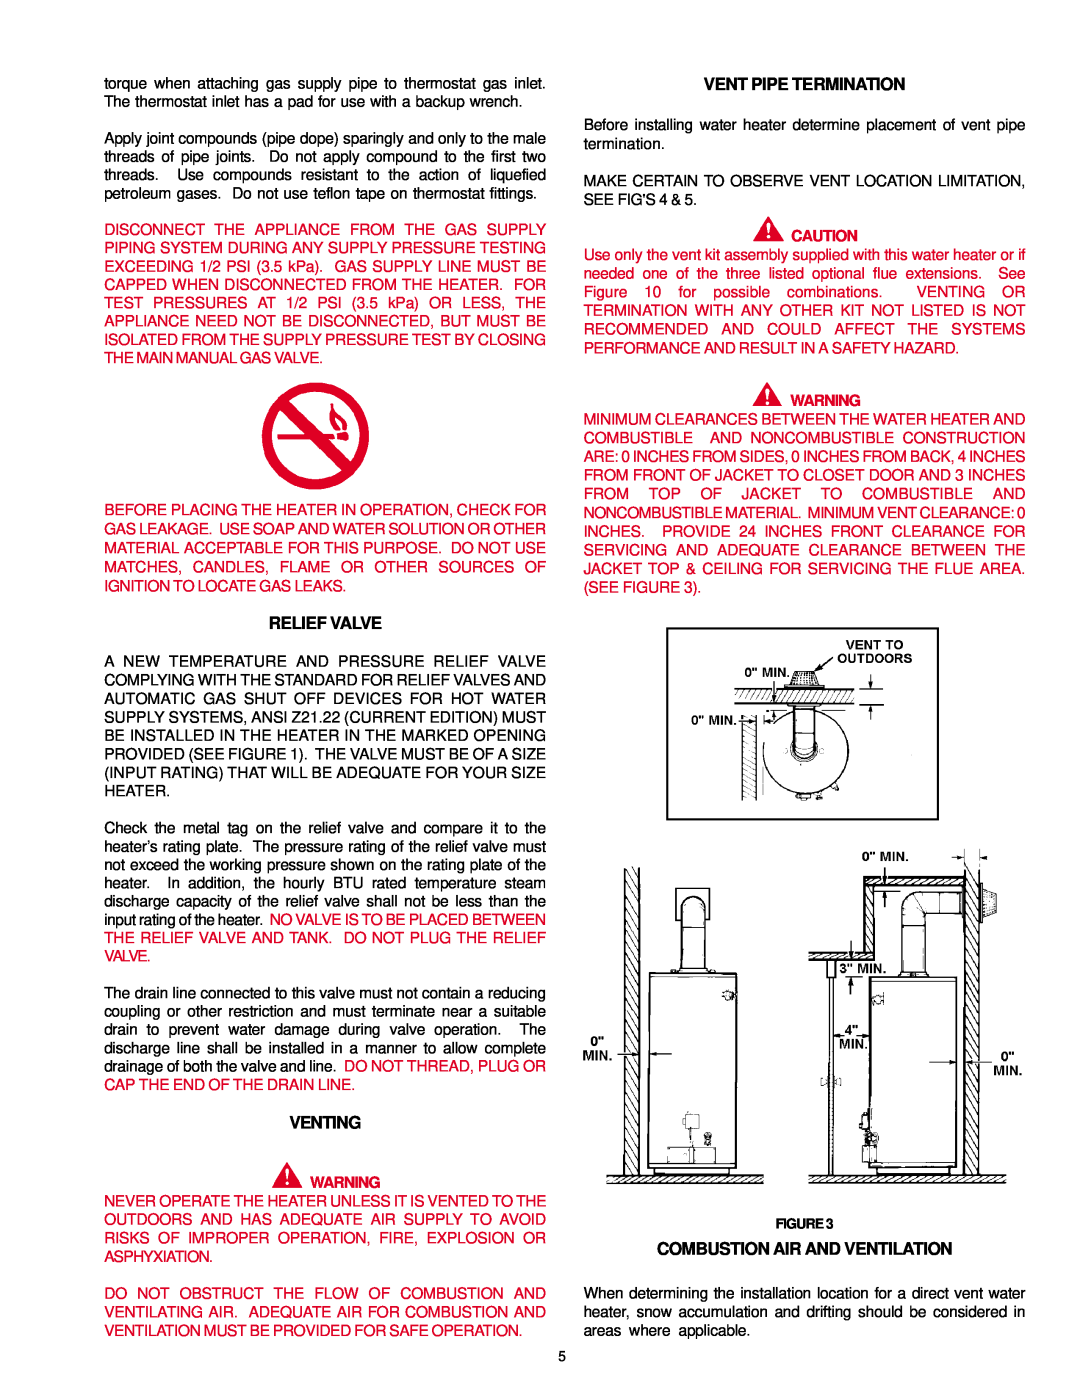 A.O. Smith SDV, FDVT owner manual Relief Valve, Venting, Vent Pipe Termination, Combustion Air And Ventilation 